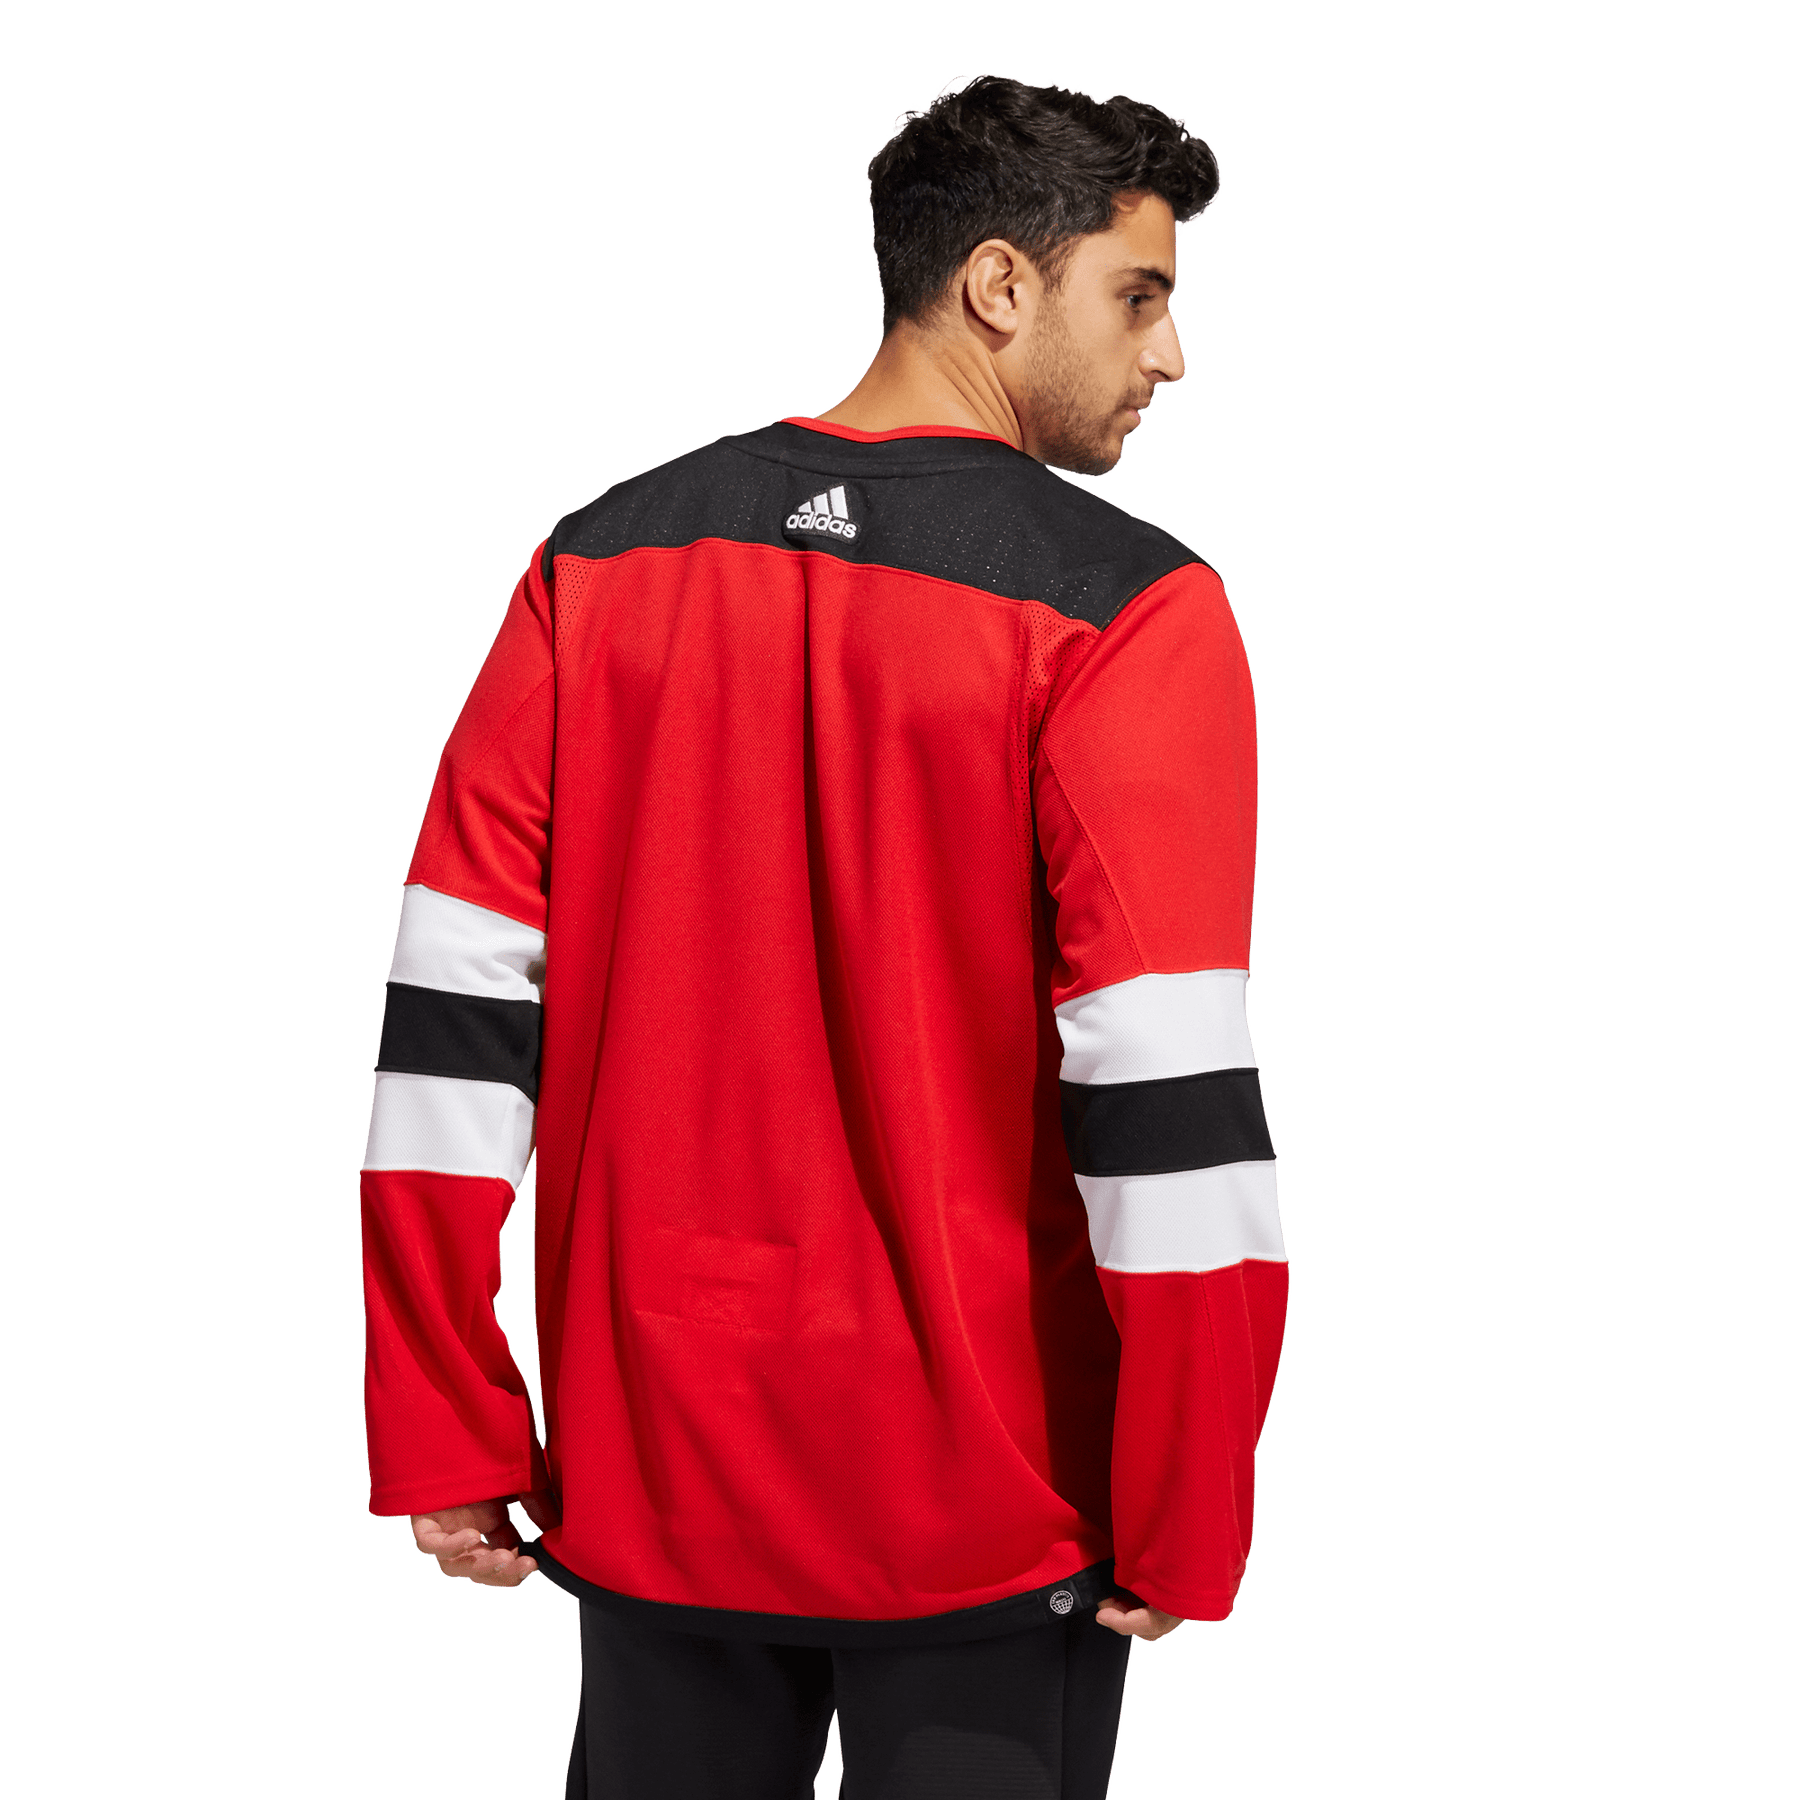 New Jersey Devils Home Adidas PrimeGreen Senior Jersey Red / 46